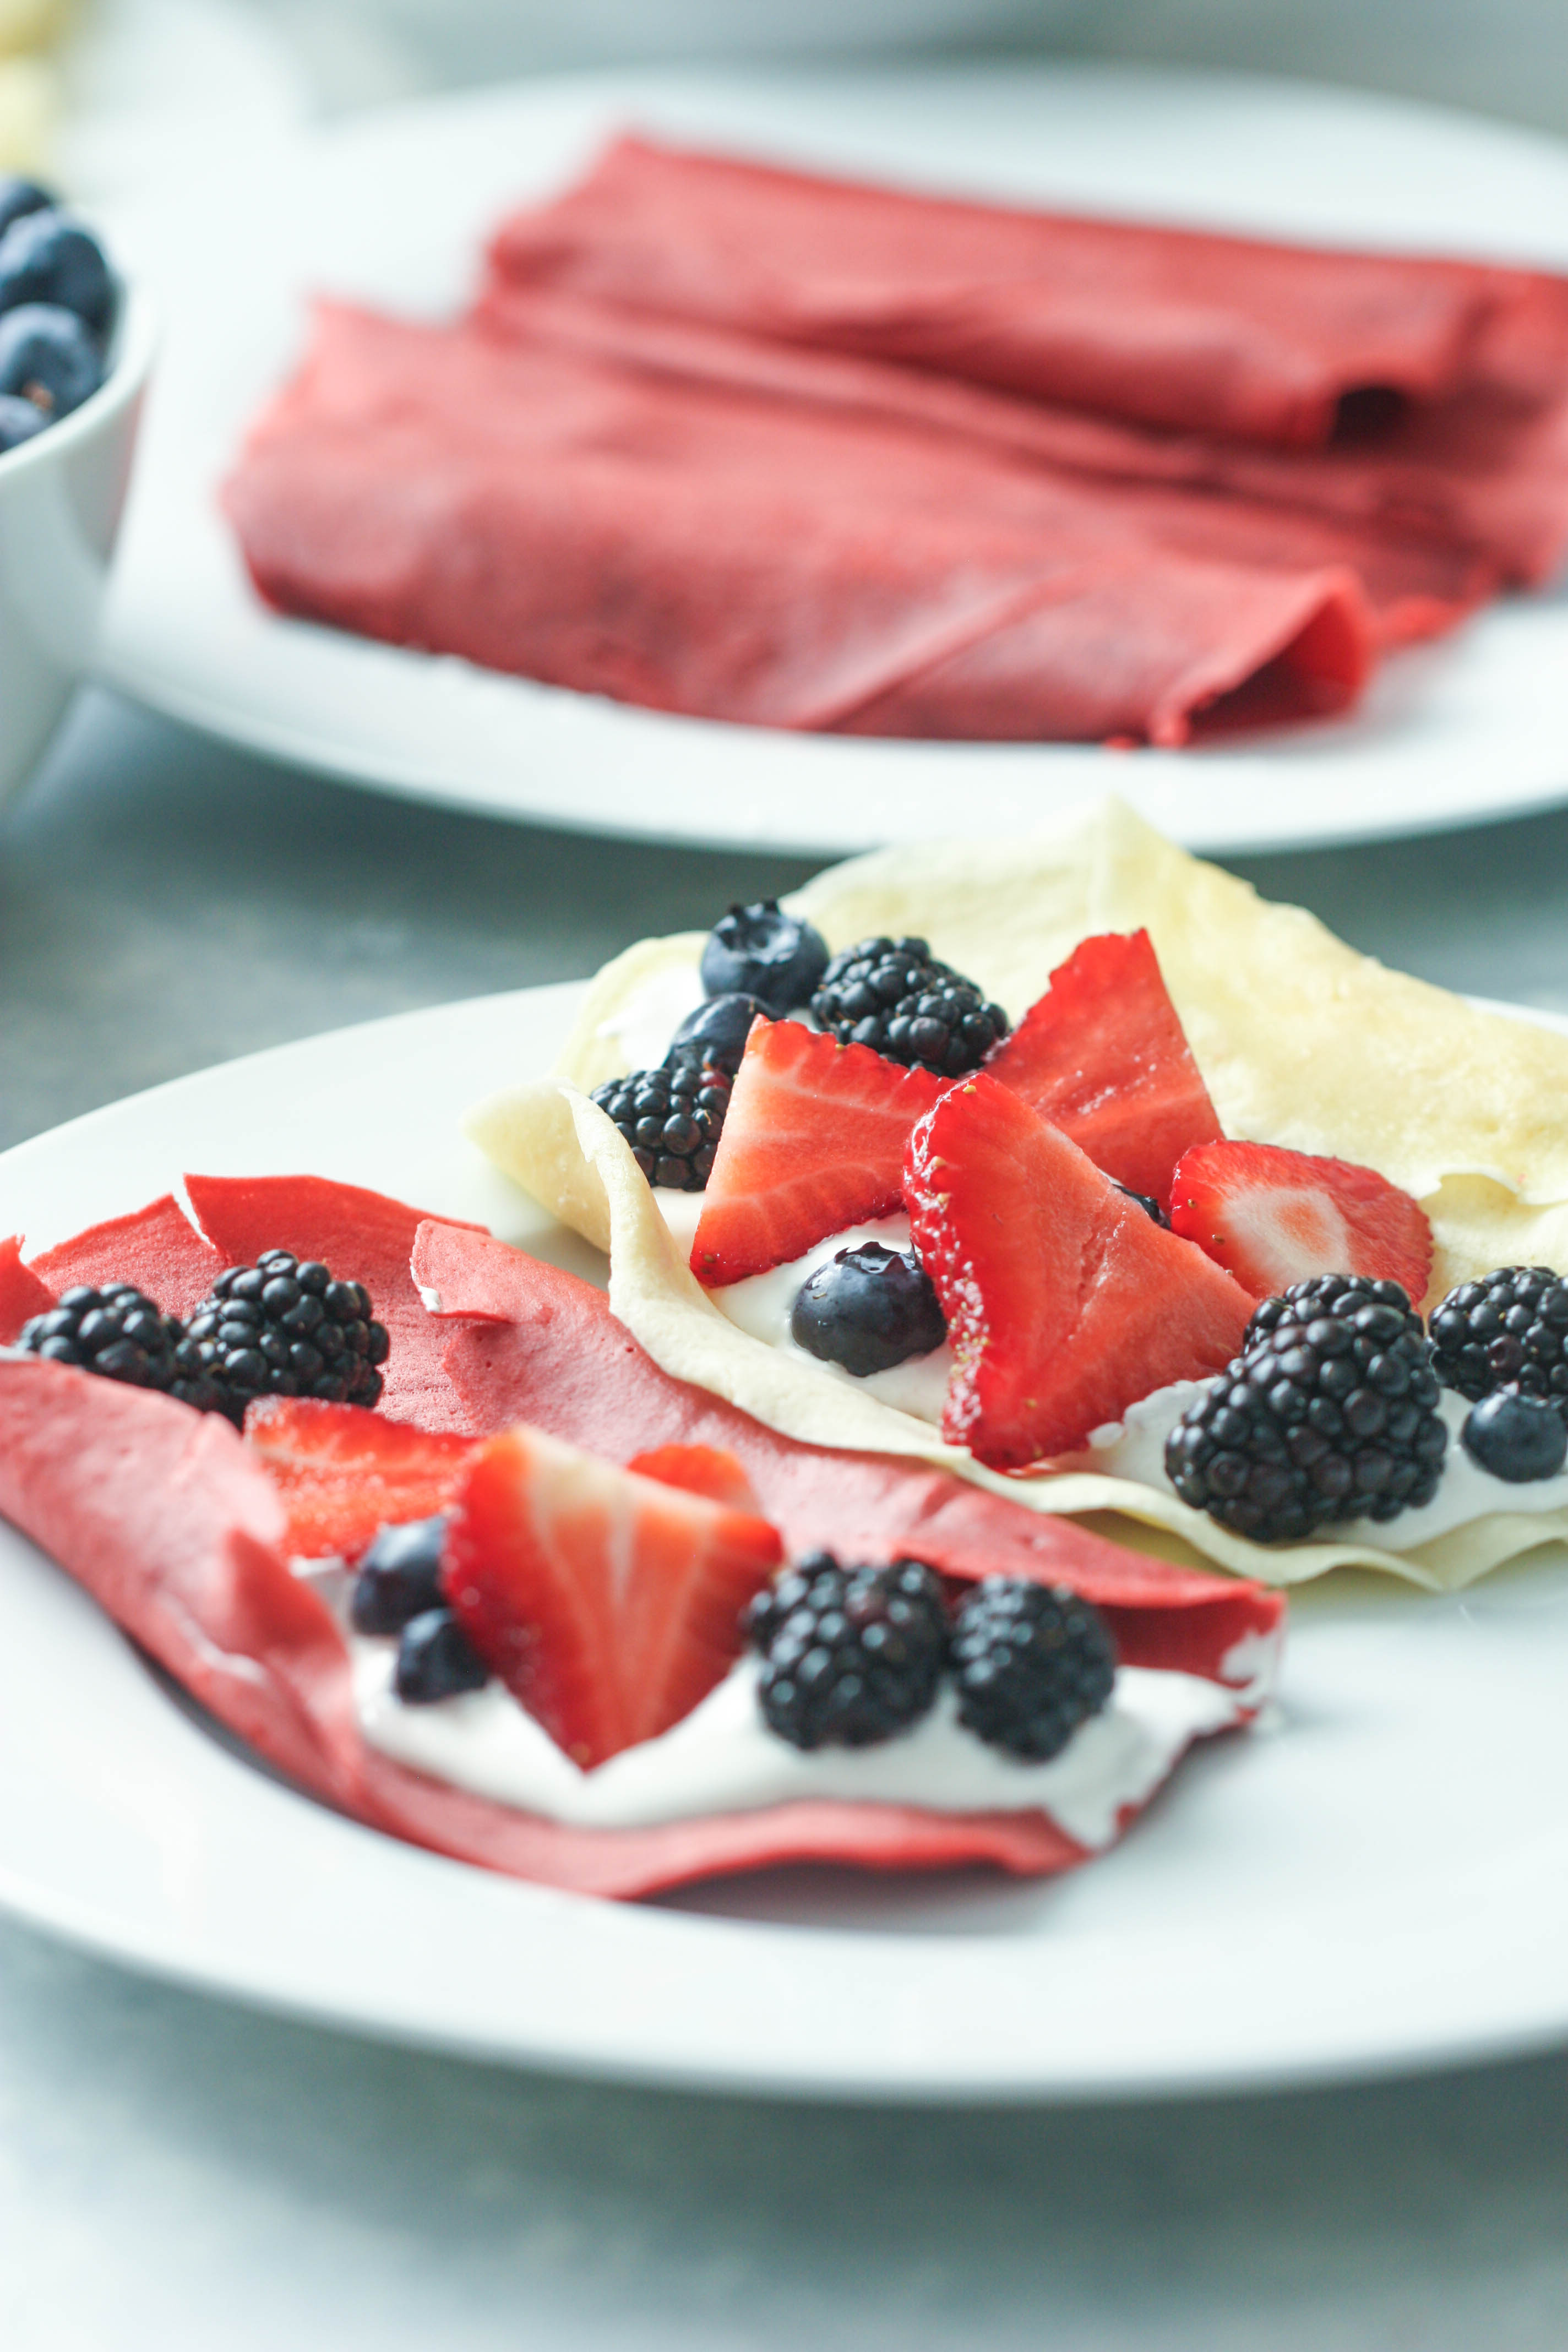 Patriotic crepes topped with filling and fresh fruit